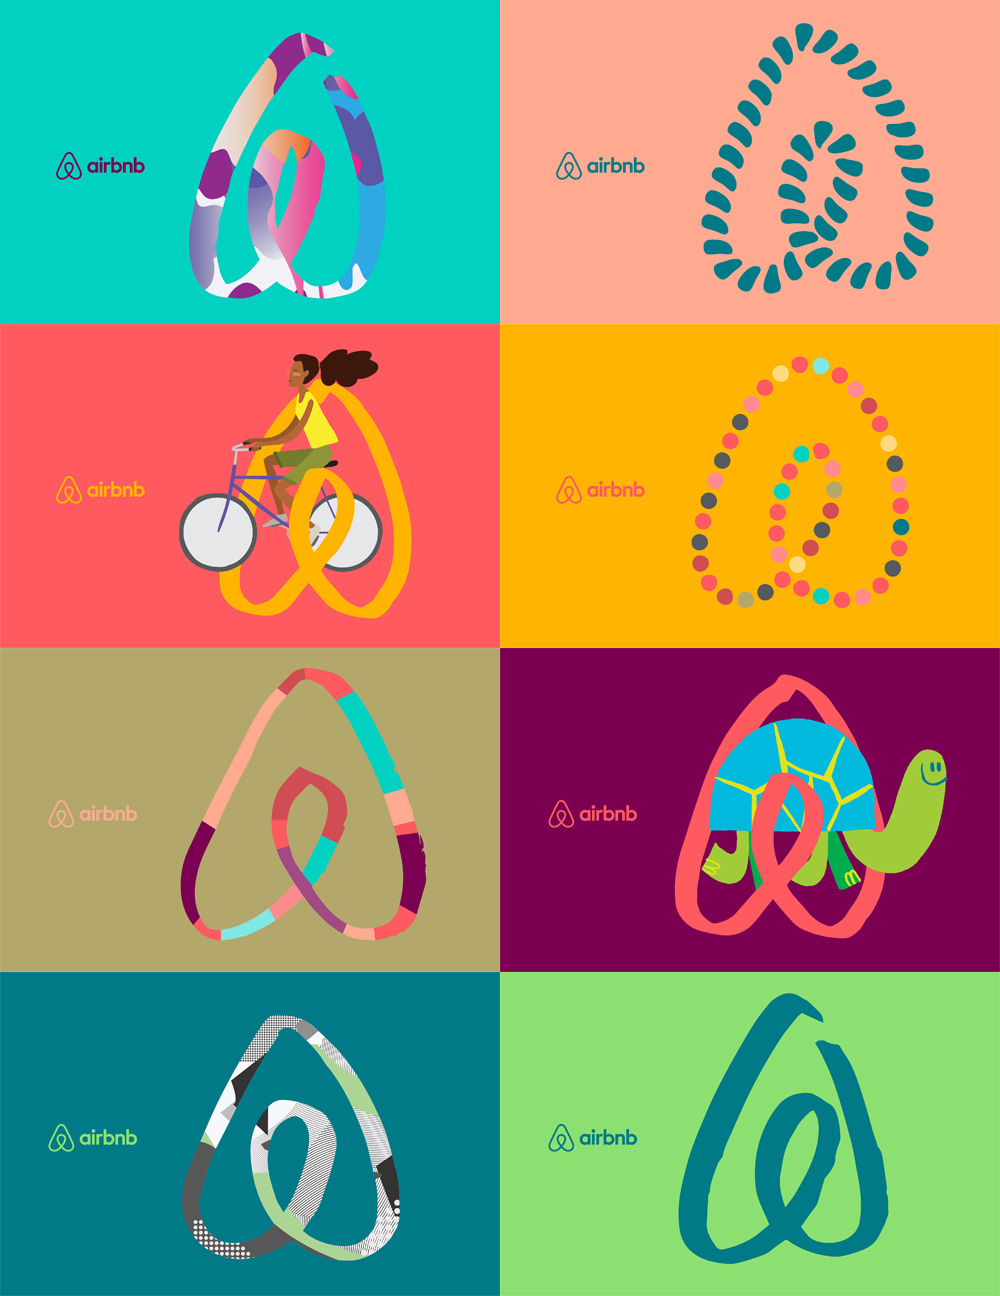 airbnb_create_icon